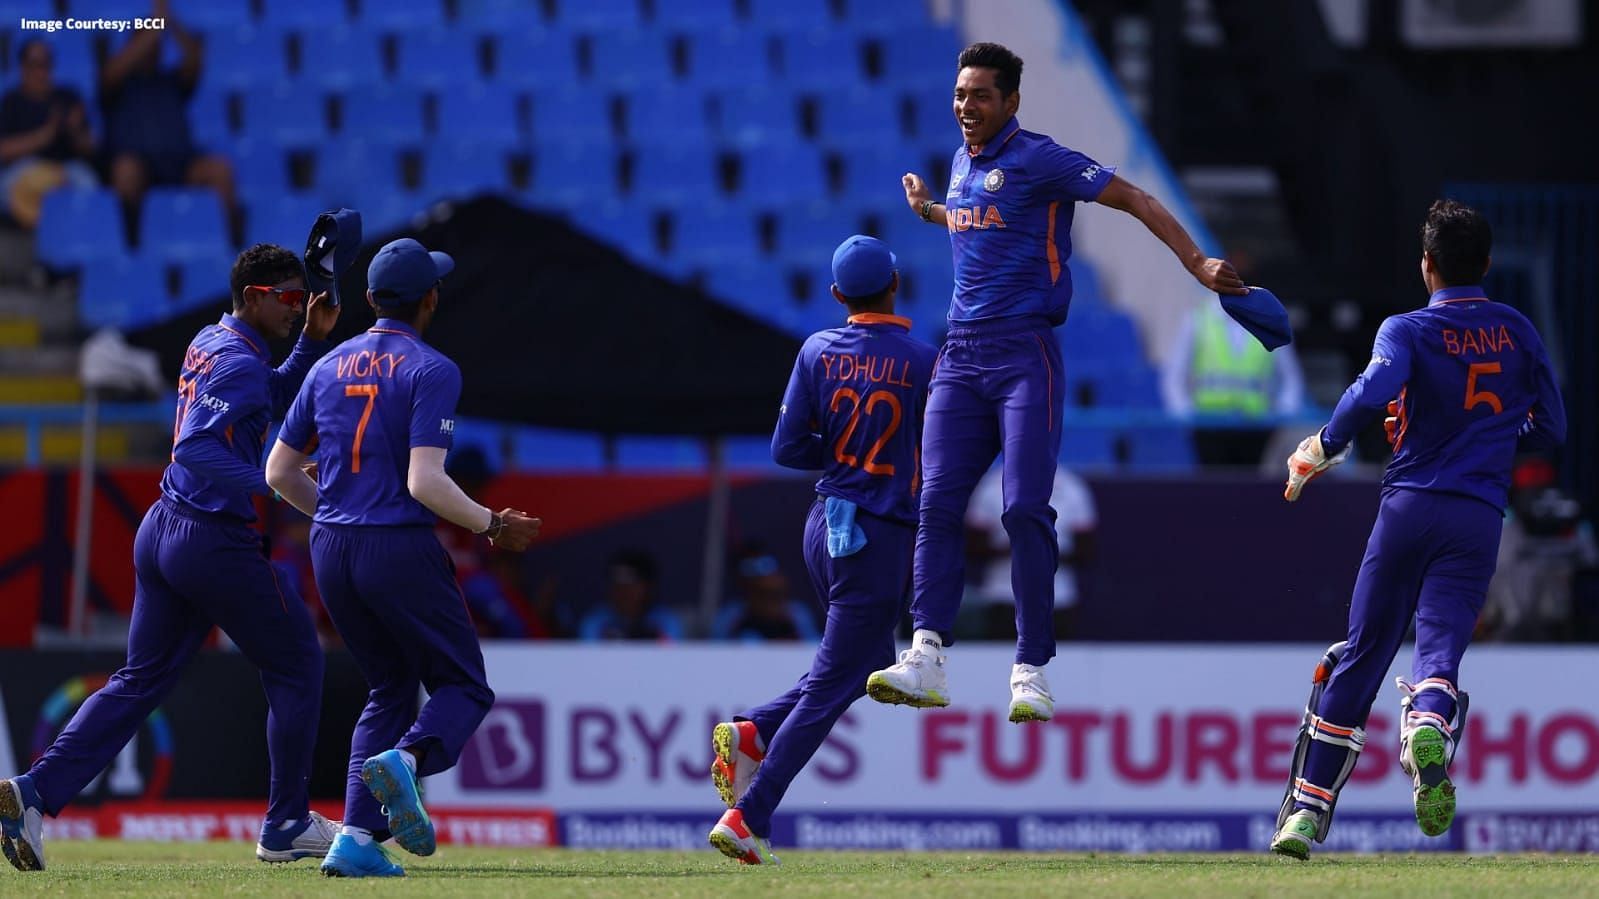 Ravi Kumar picked UP 10 wickets at an average of 13.20 at the U19 World Cup 2022